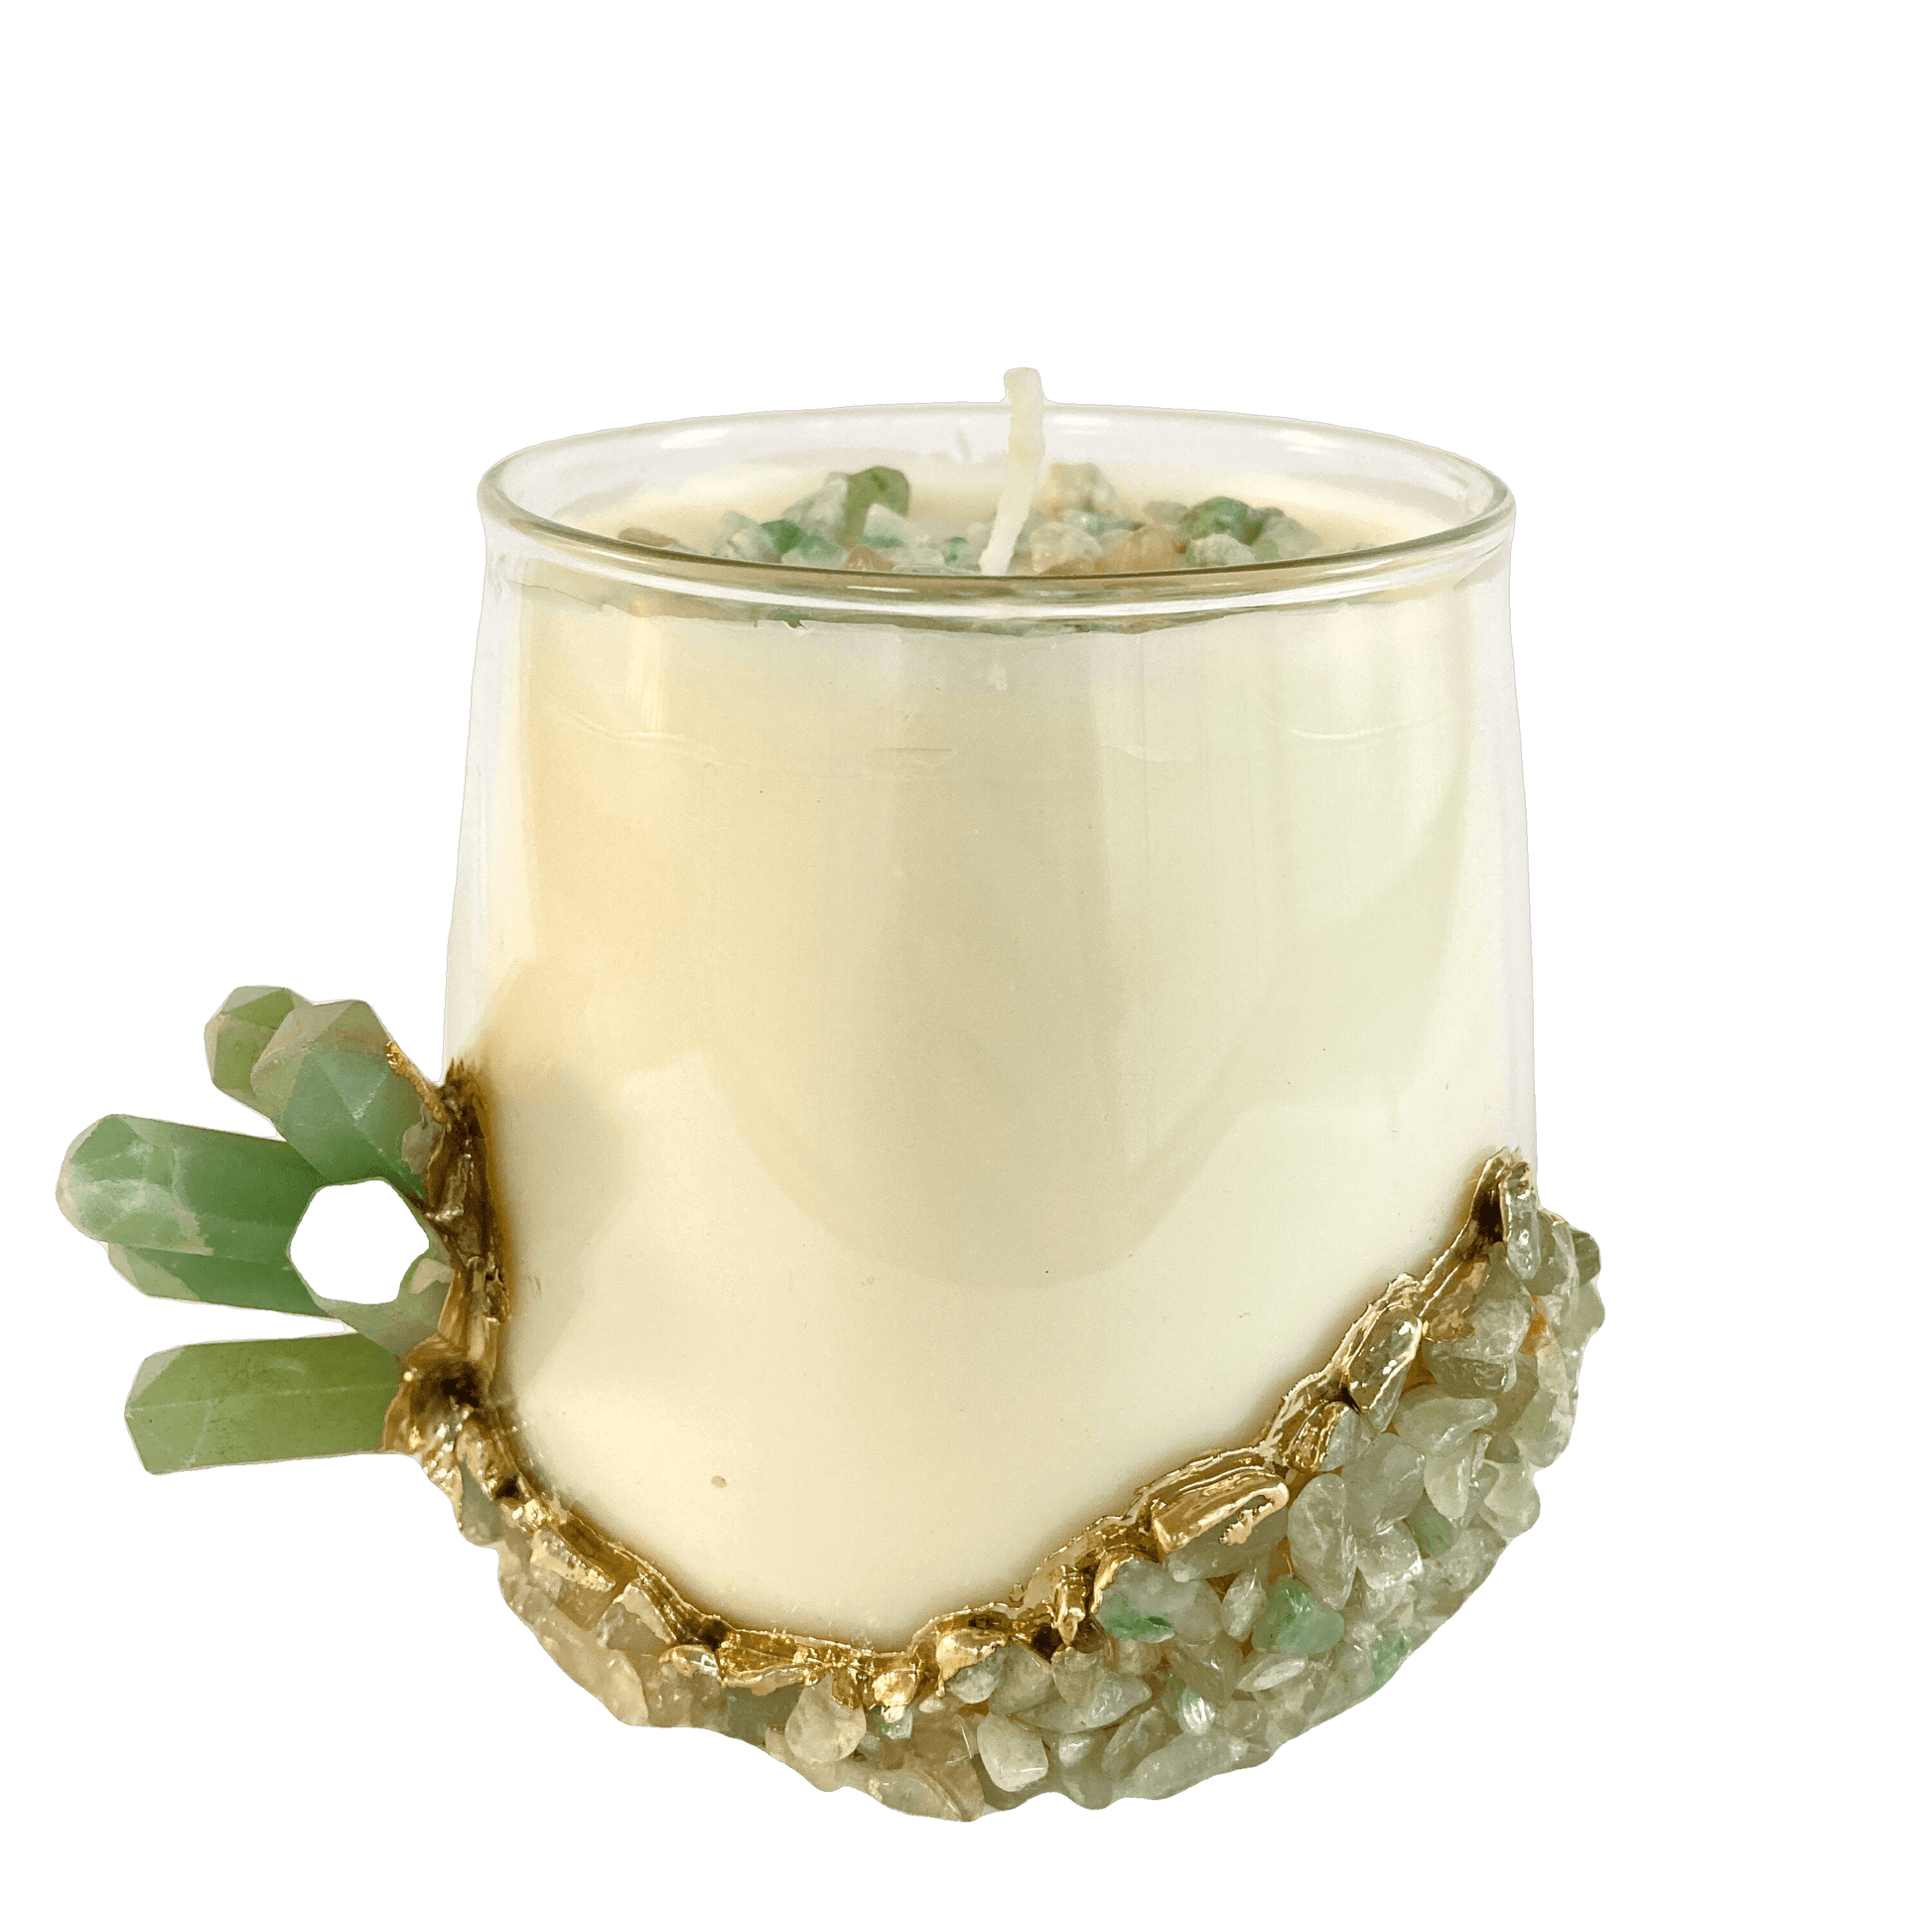 Green Agate Quartz Crystal Scented Soy Candles in Glass Mug - Set of 2 - MAIA HOMES